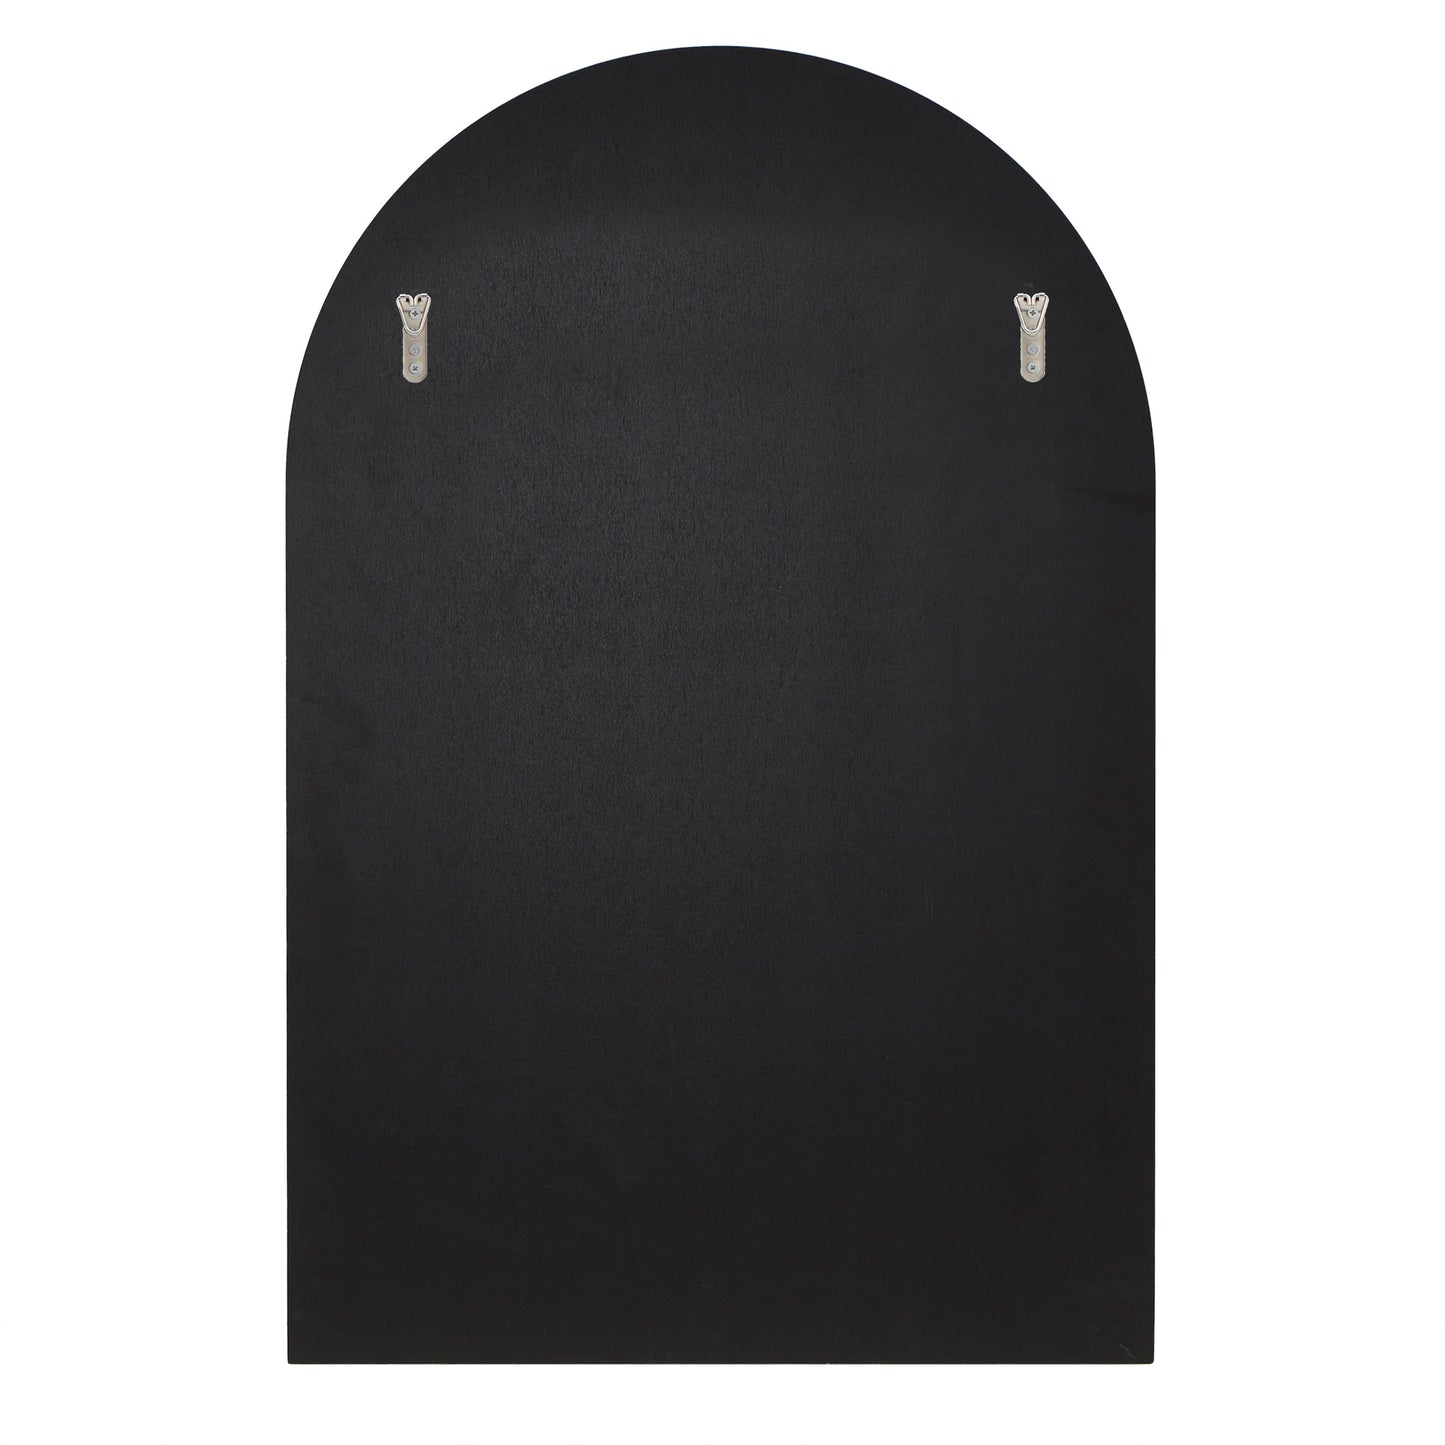 Metal Arched Wall Mirror with Shelf - Black Finish